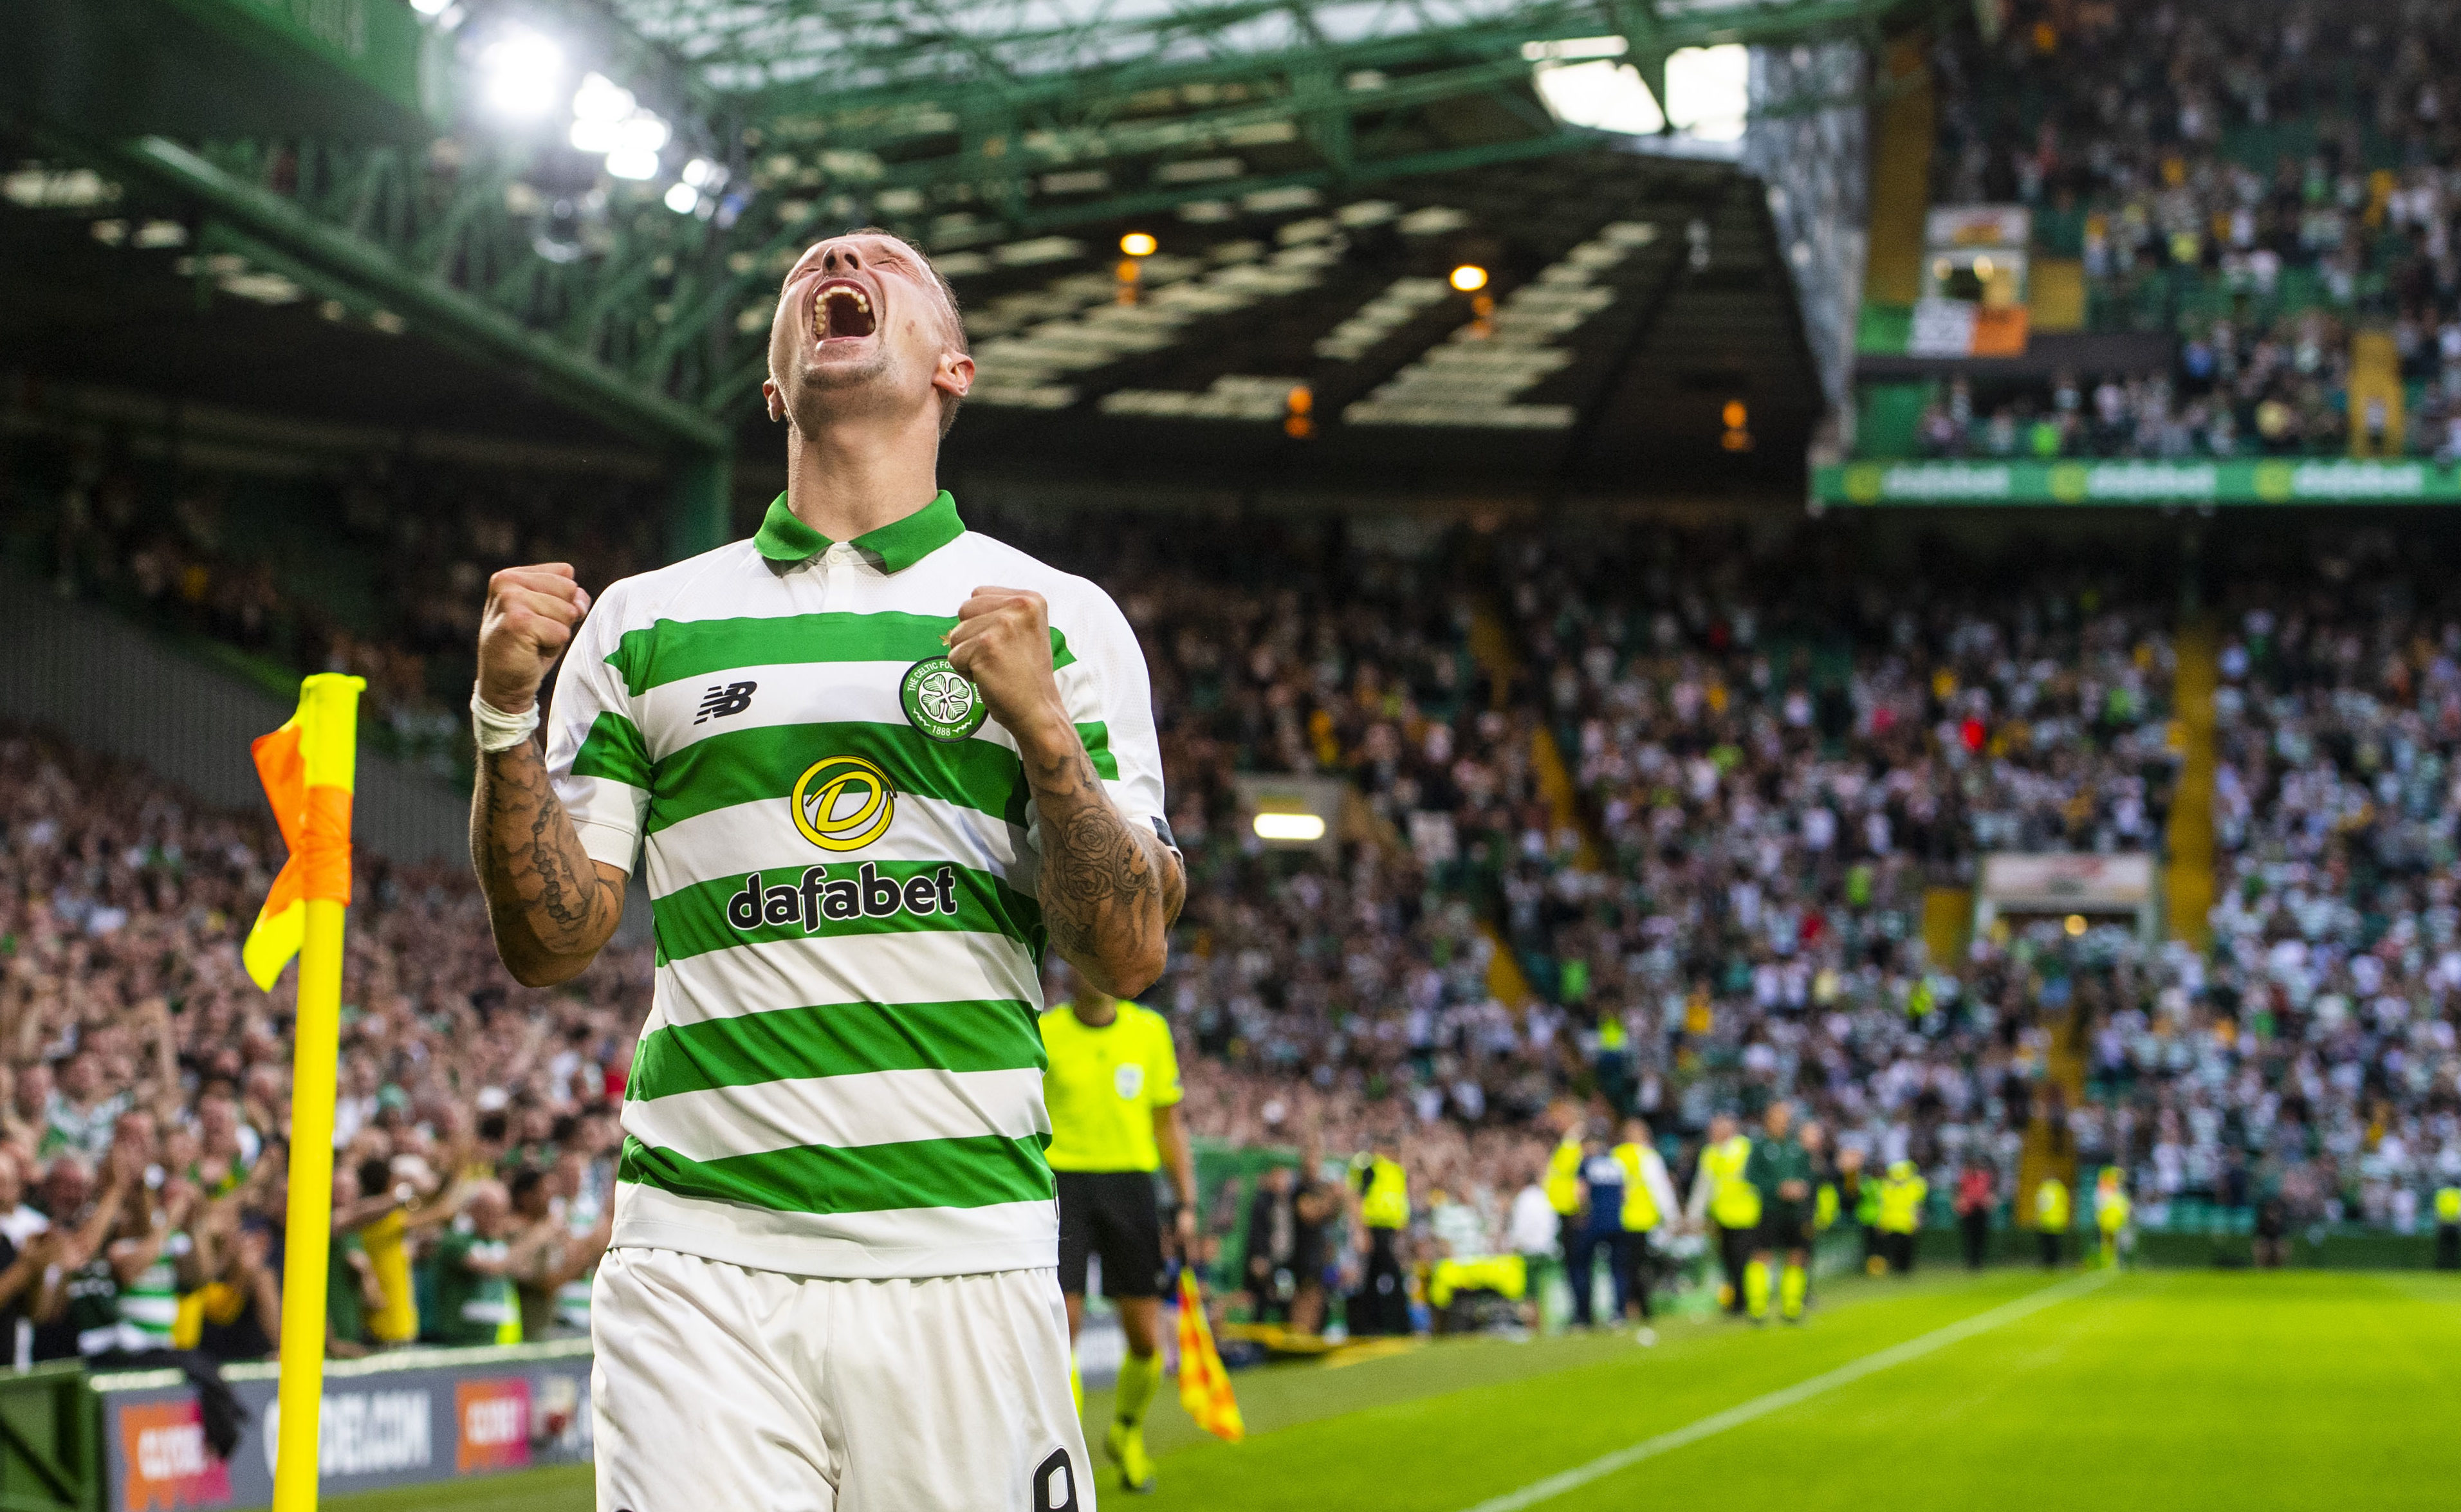 Leigh Griffiths celebrates after scoring to make it 3-0